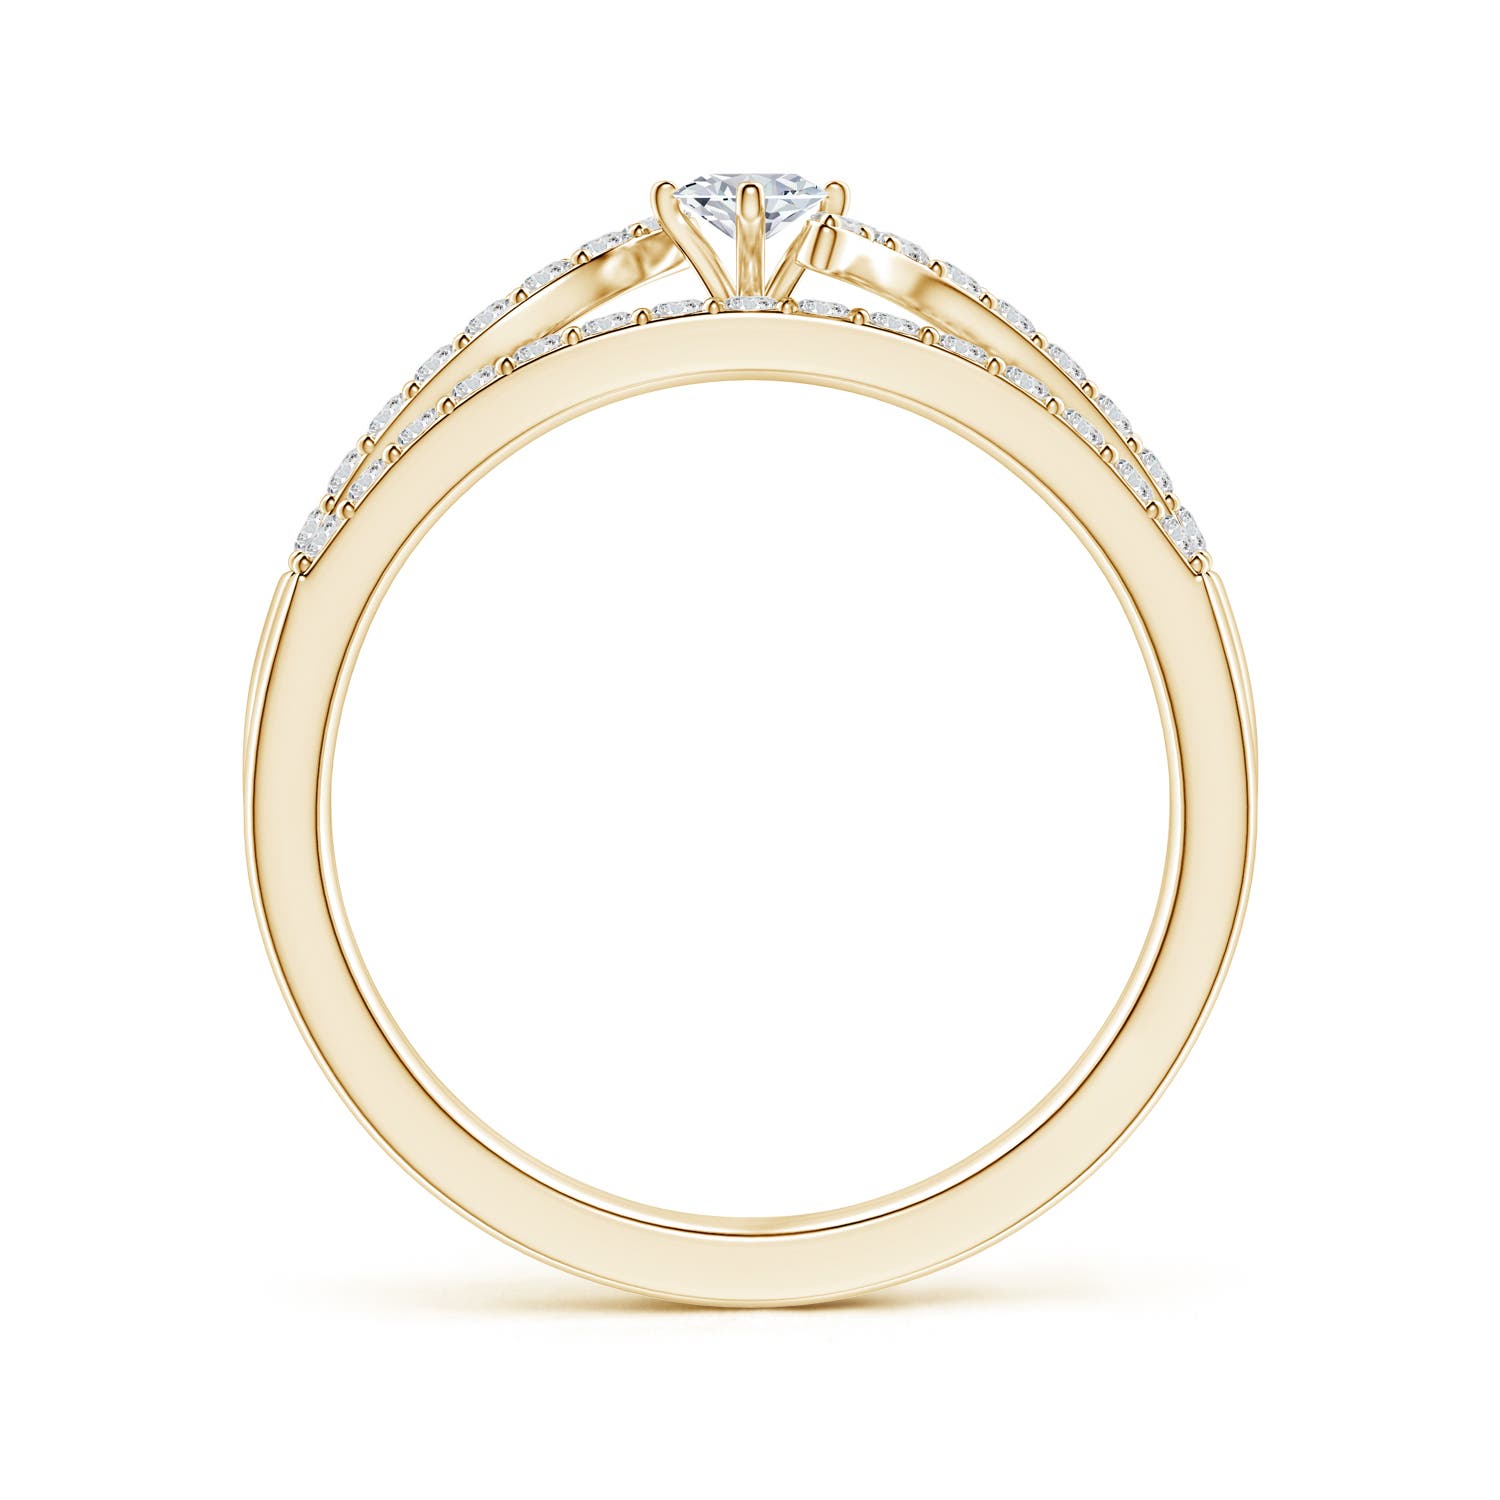 H, SI2 / 0.63 CT / 14 KT Yellow Gold